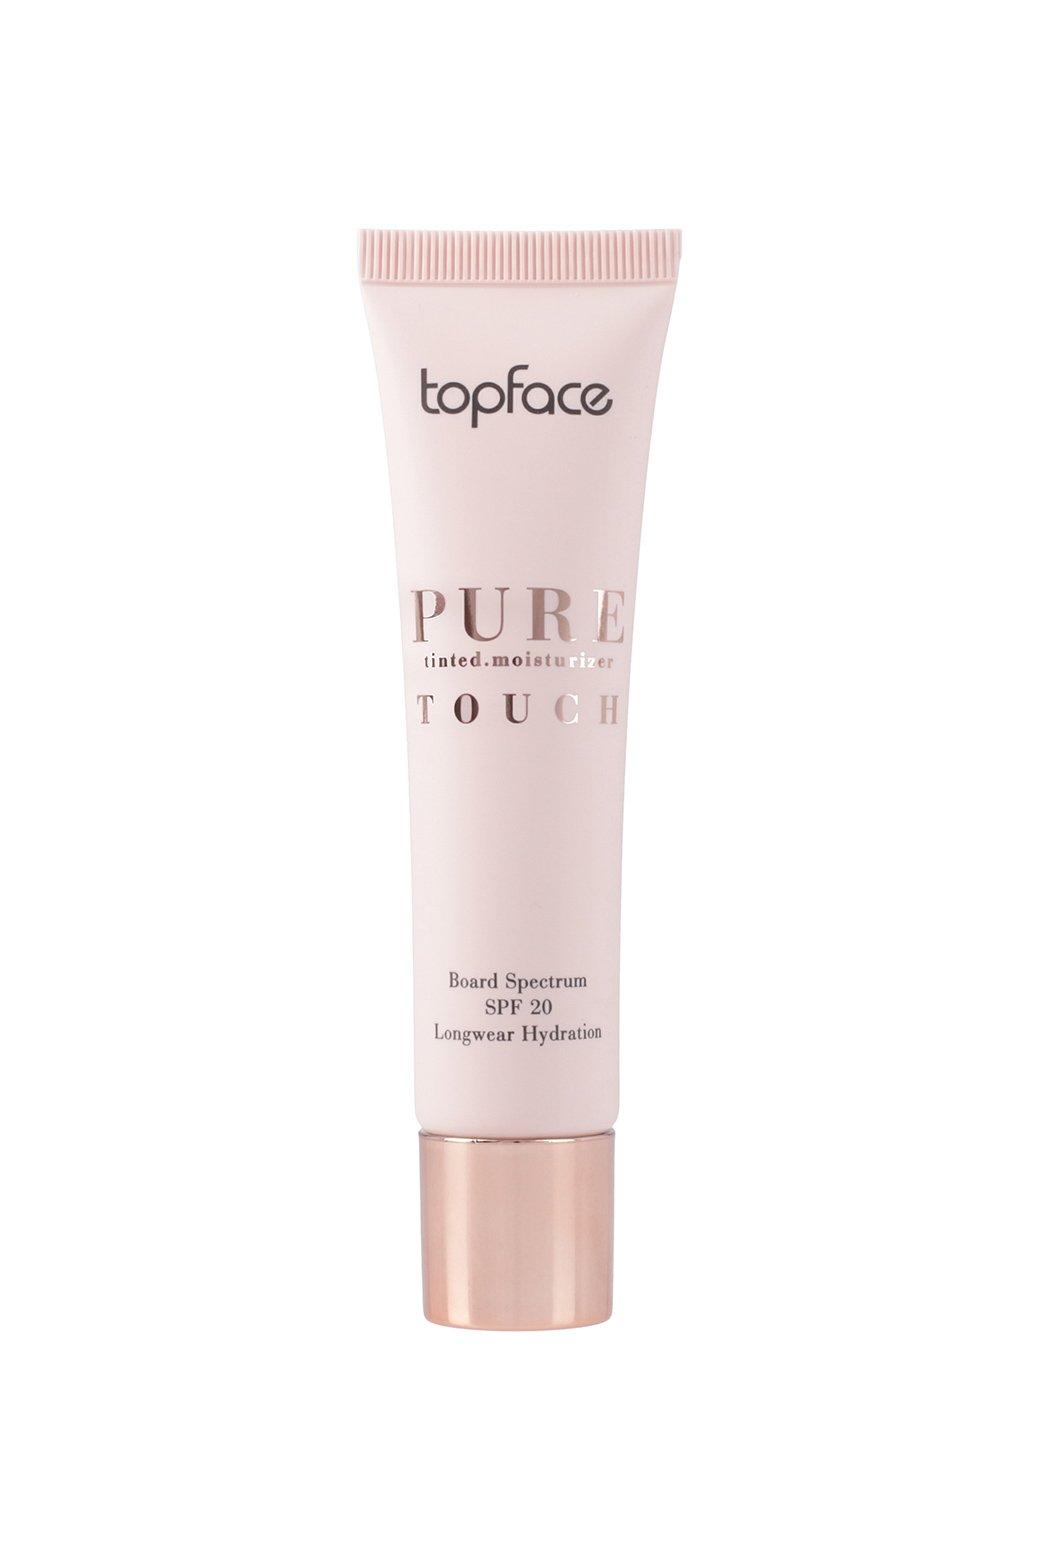 PURE TOUCH TINTED MOISTURIZER (3 SHADES), ACCESSORIES